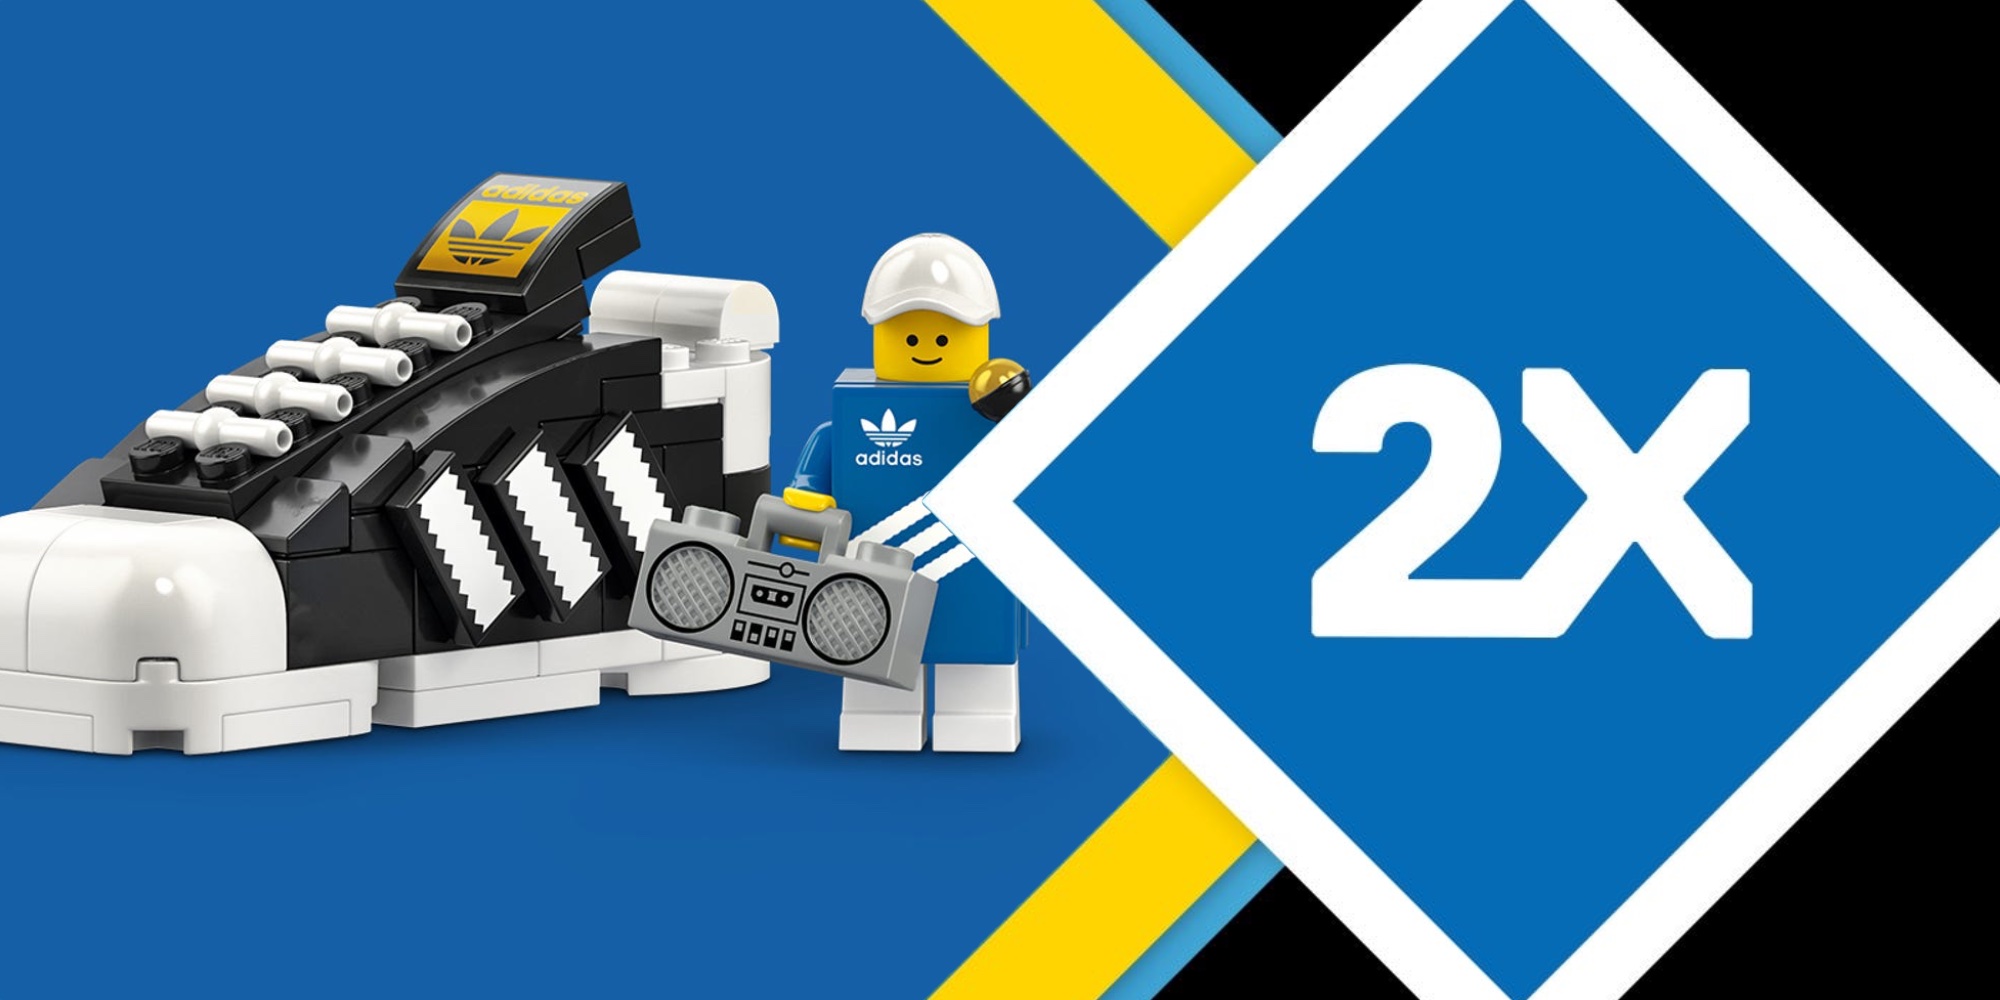 LEGO double VIP points promo goes live for summer savings 9to5Toys